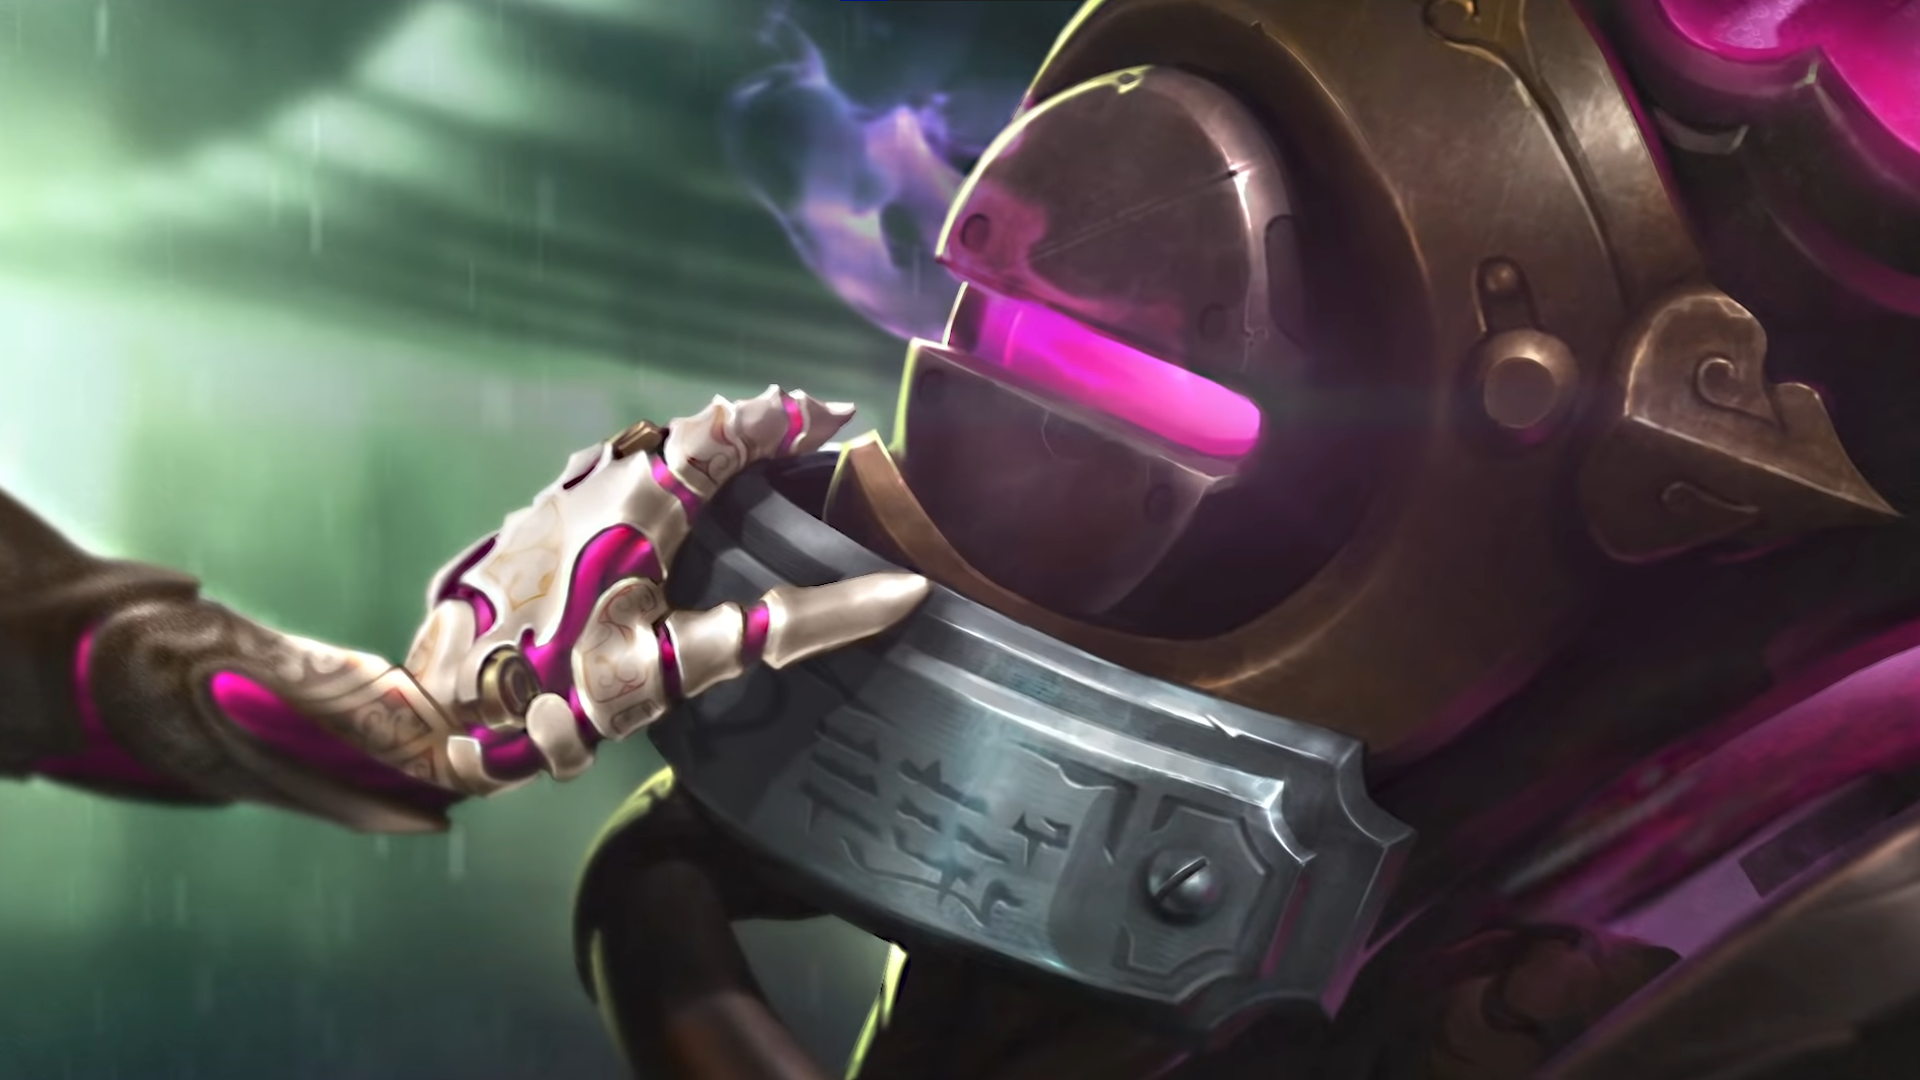 rester computer give Riot teases next 3 League champions as unnamed support enchanter, jungler,  and bottom laner - Dot Esports